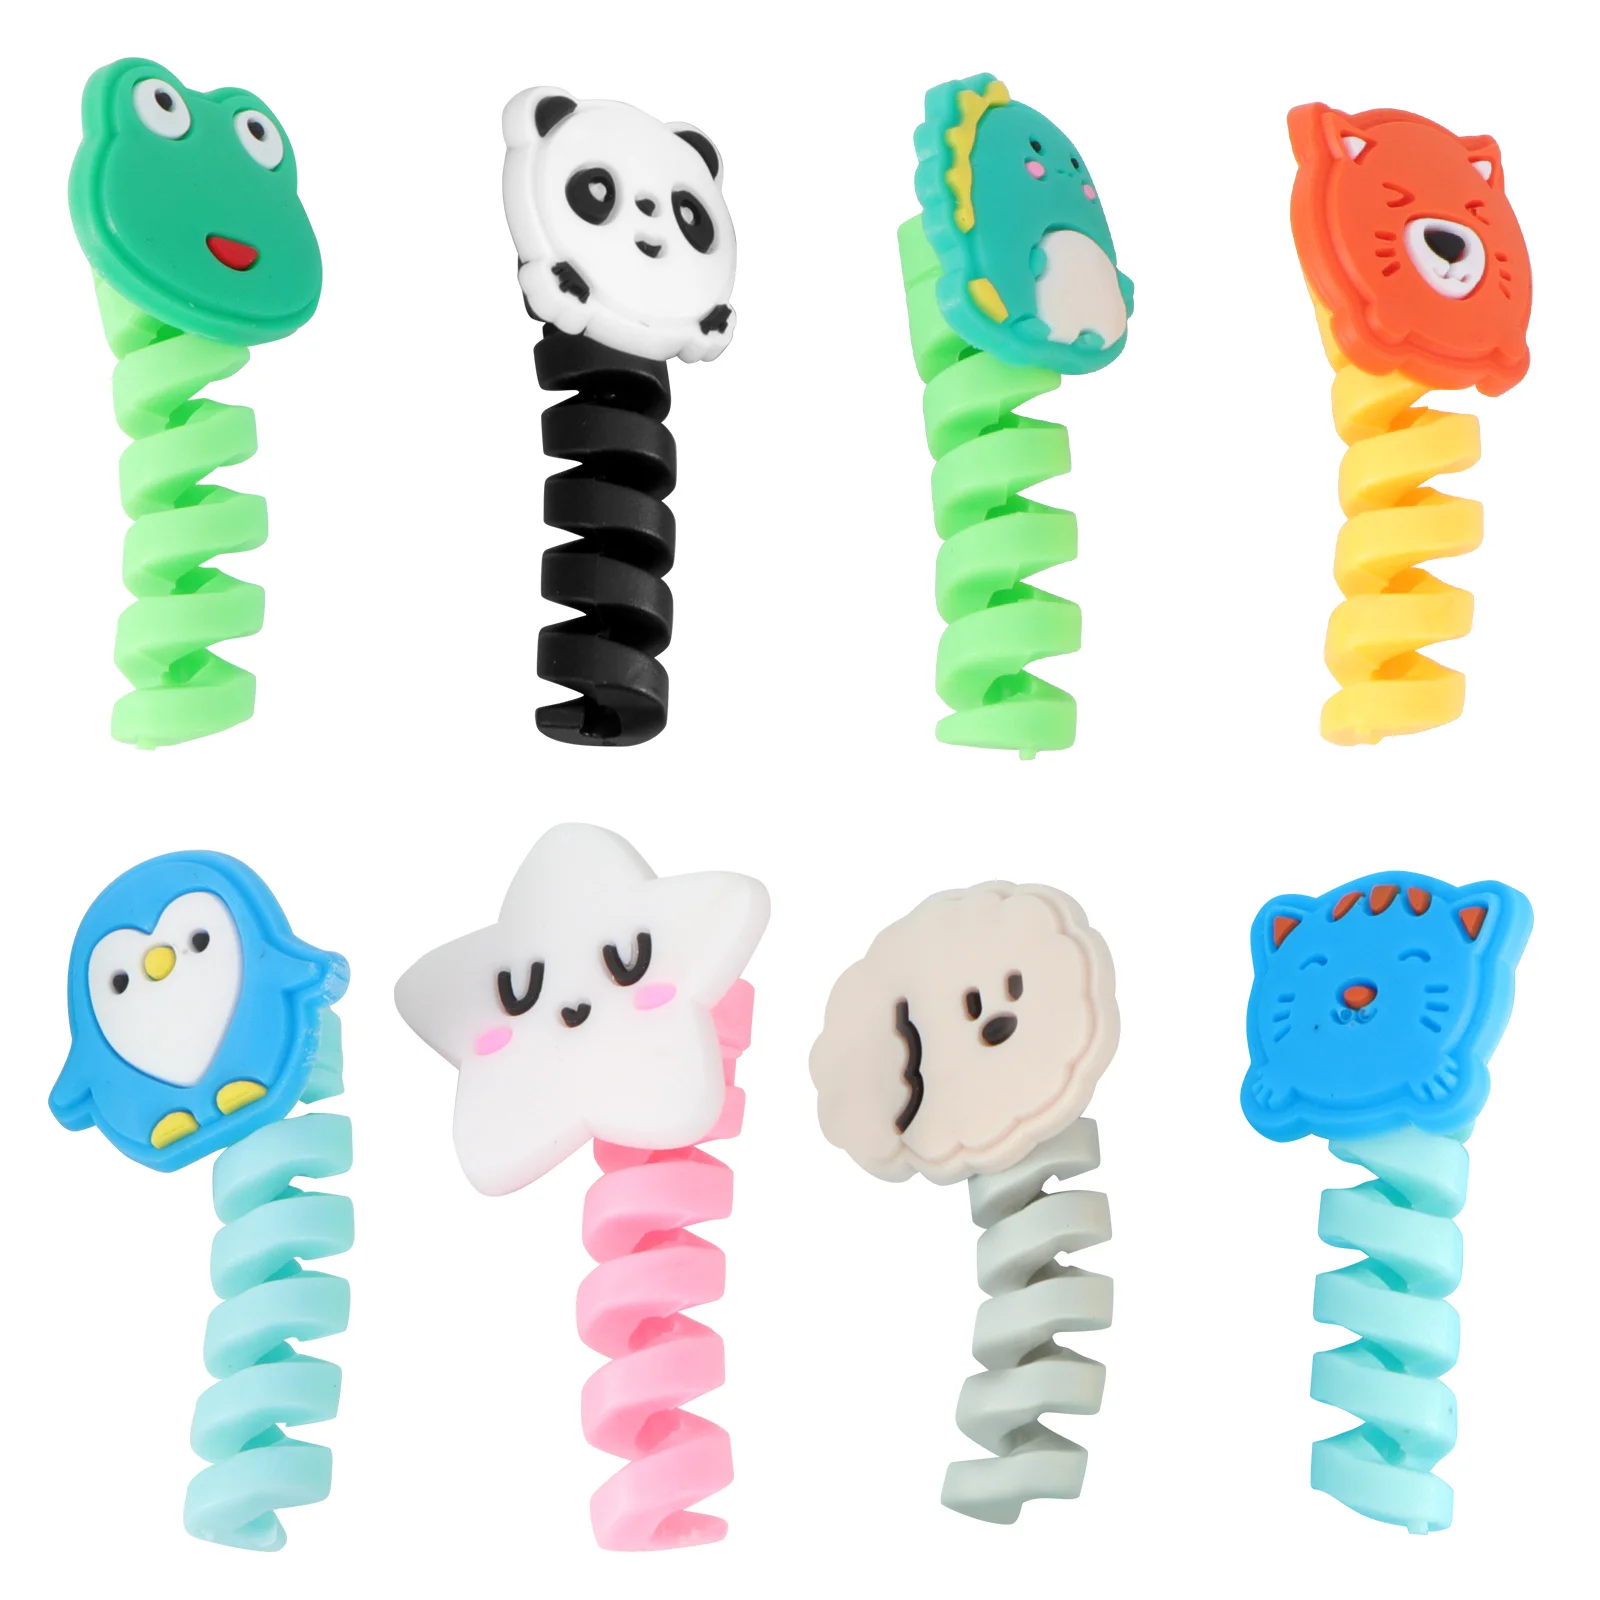 

Cable Protector Wire Animal Data Saver Winders Cartoon Protectors Organizers Earphone Silicone Cord Earbud Spiral Flexible